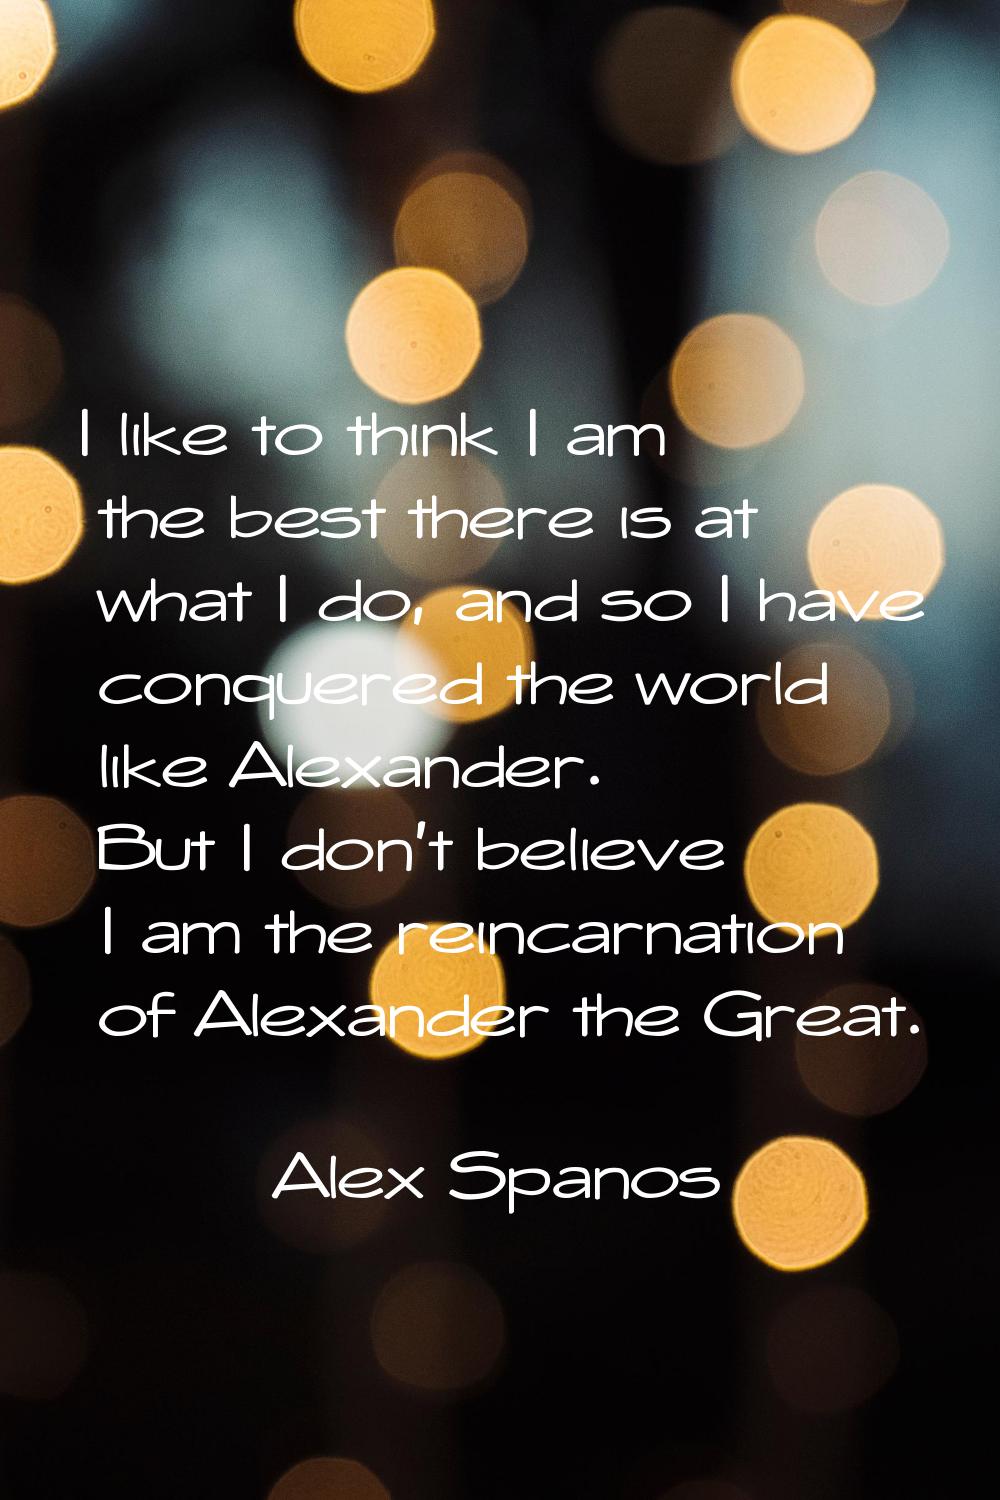 I like to think I am the best there is at what I do, and so I have conquered the world like Alexand